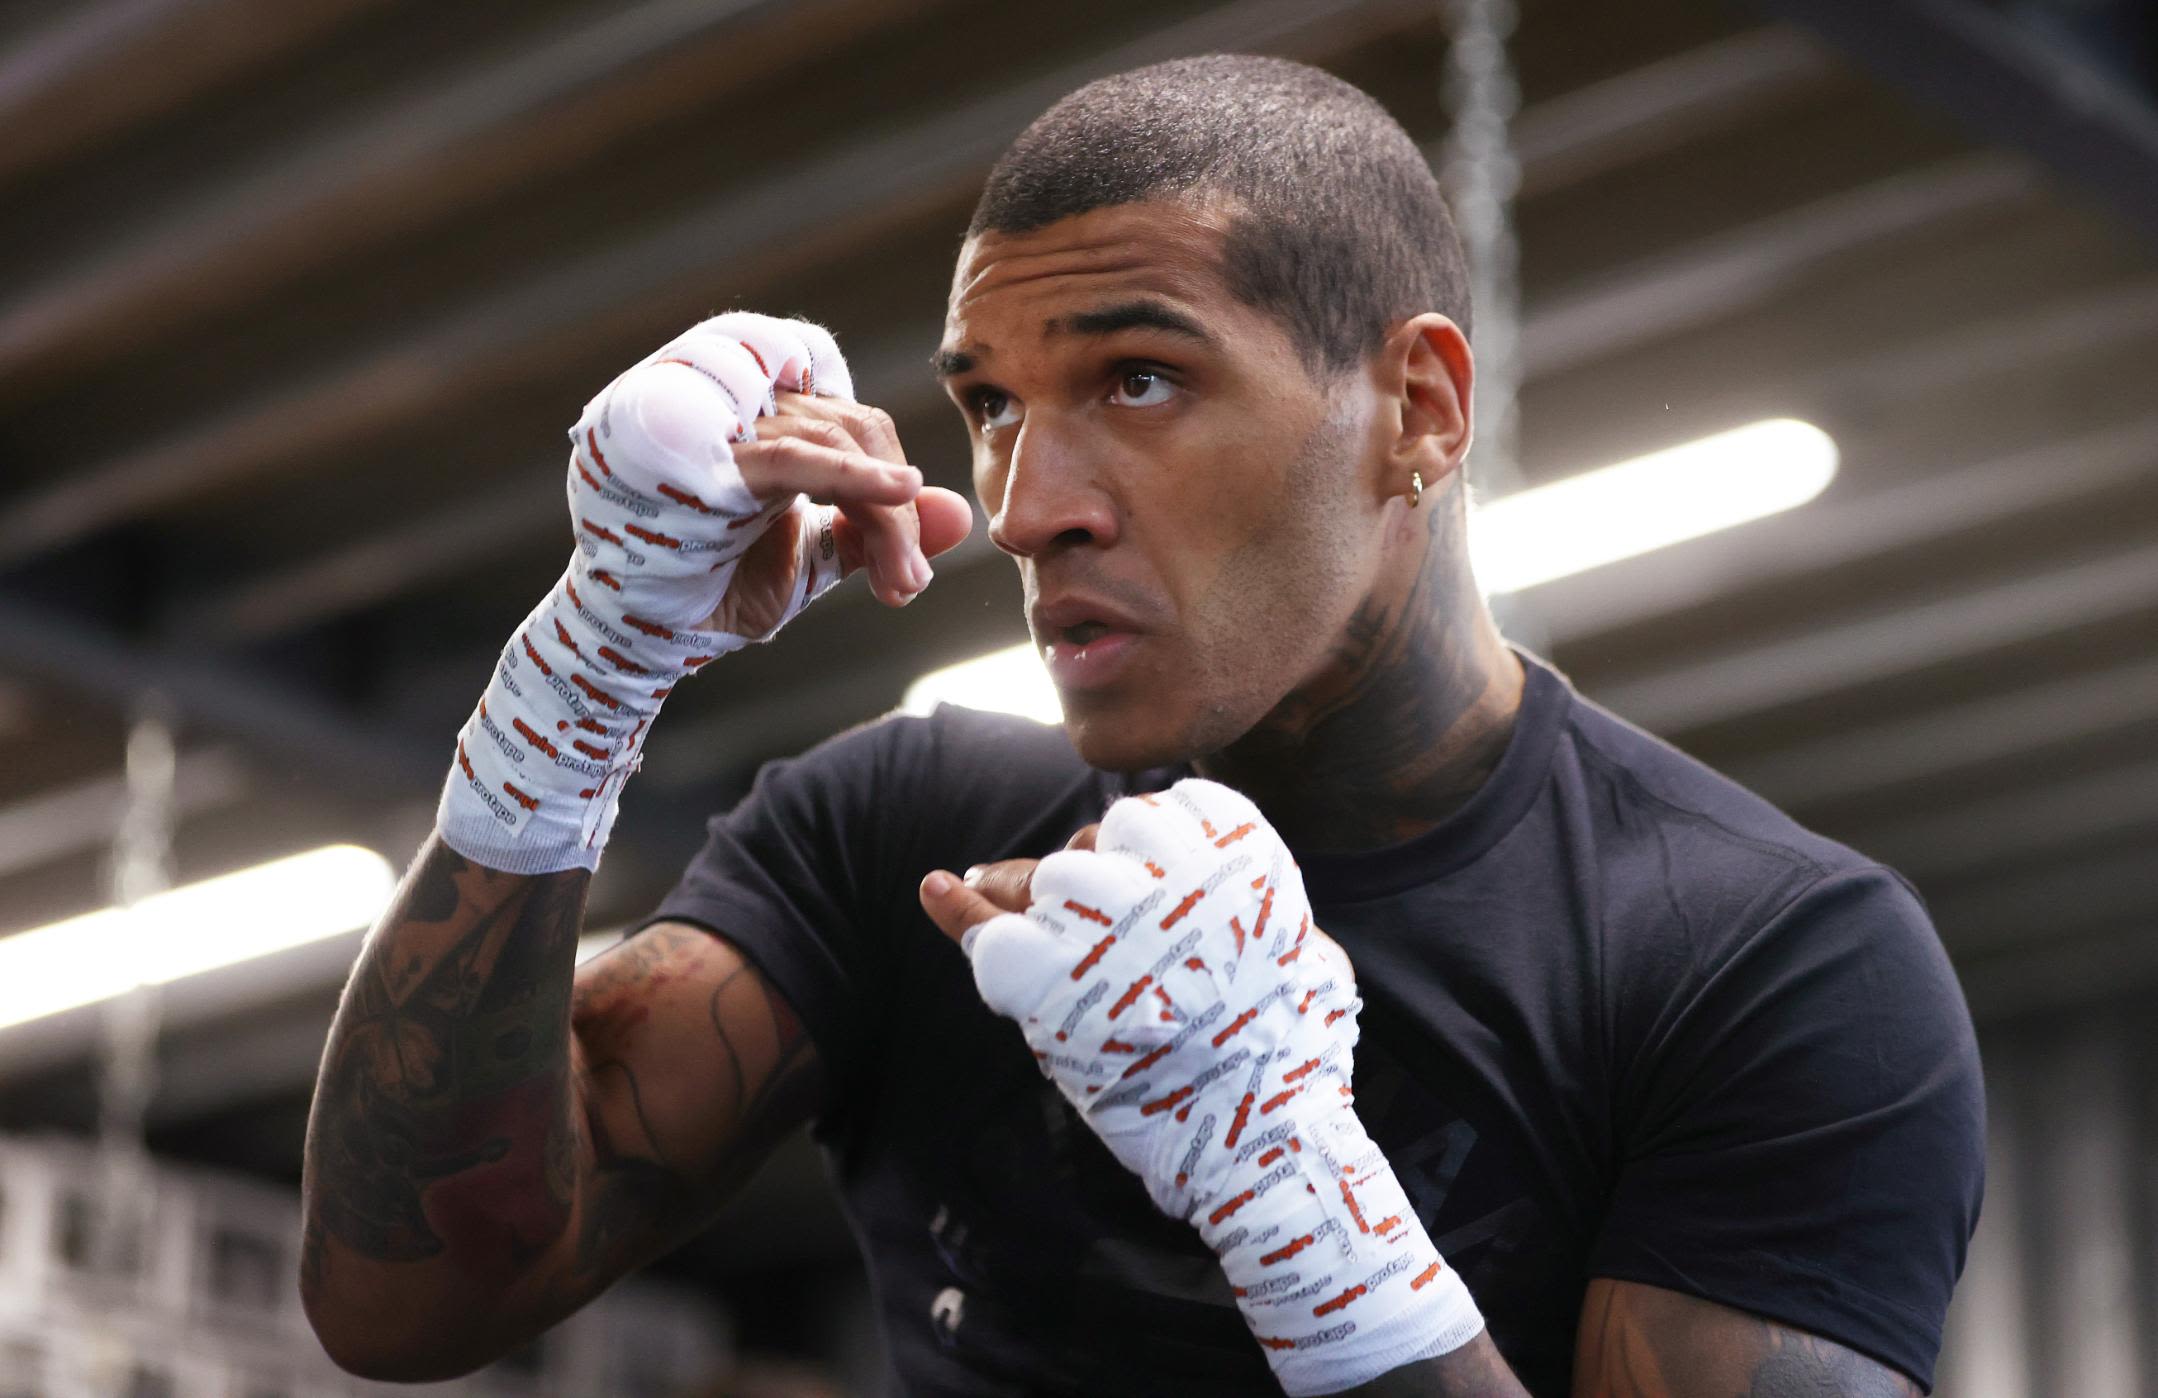 Conor Benn Responds To WBC Statement, Raises Issues With Testing Procedures